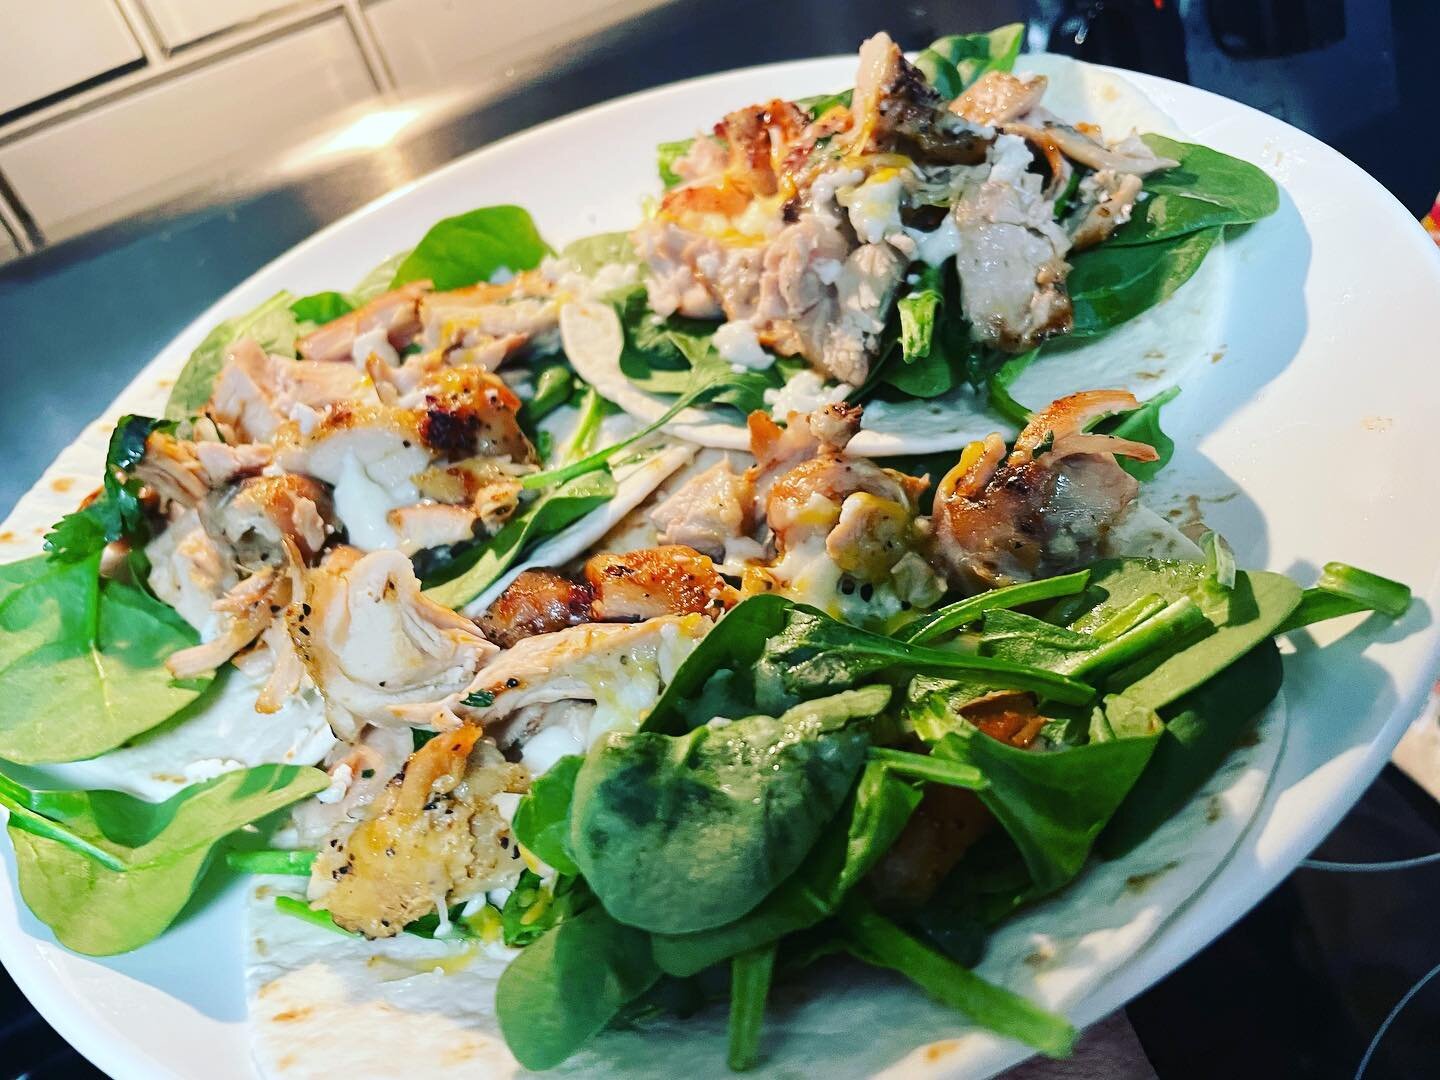 BBQ Chicken &amp; Spinach Tacos made with succulent boneless chicken thighs, warm tortillas and fresh spinach. This is a great post workout meal to get all those helpful nutrients into your body for a full recovery. Let&rsquo;s eat 🔥🔥🔥 #healthy #h